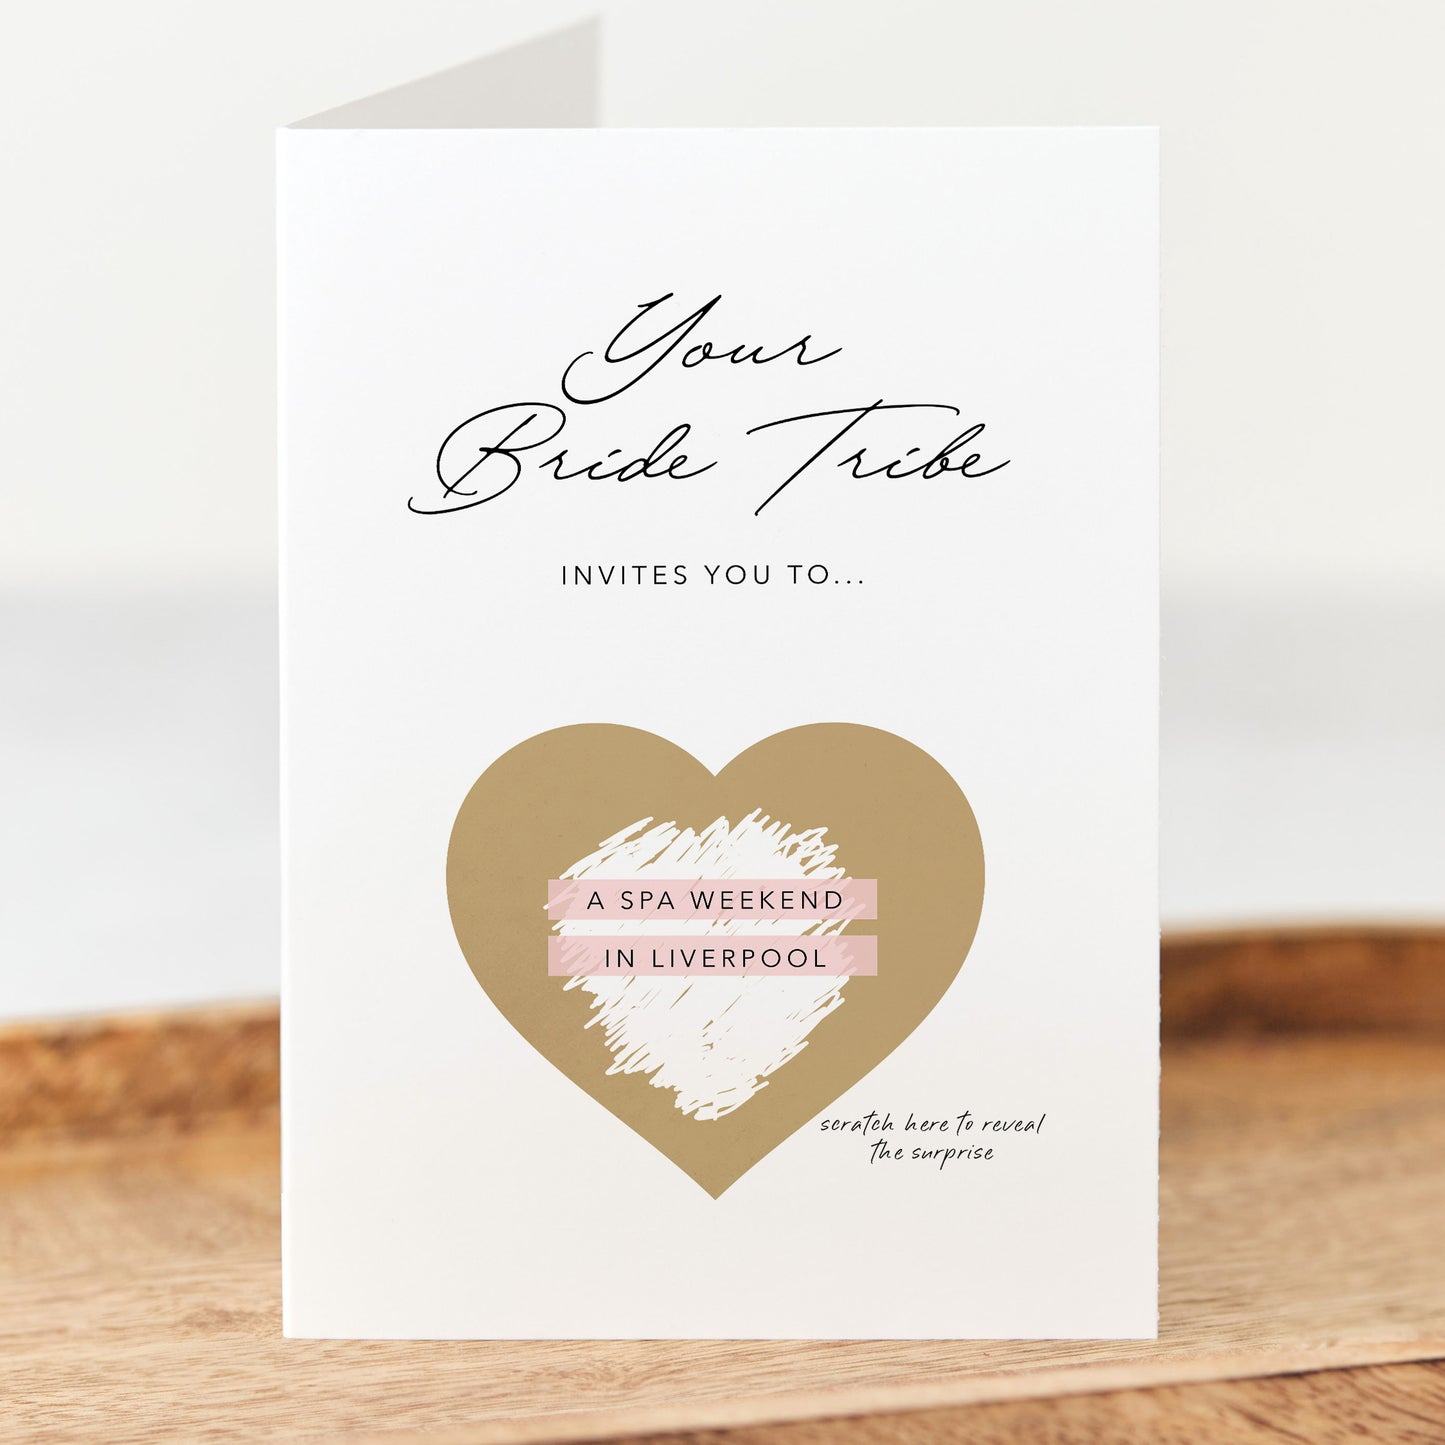 Your bride tribe invites you to scratch off card